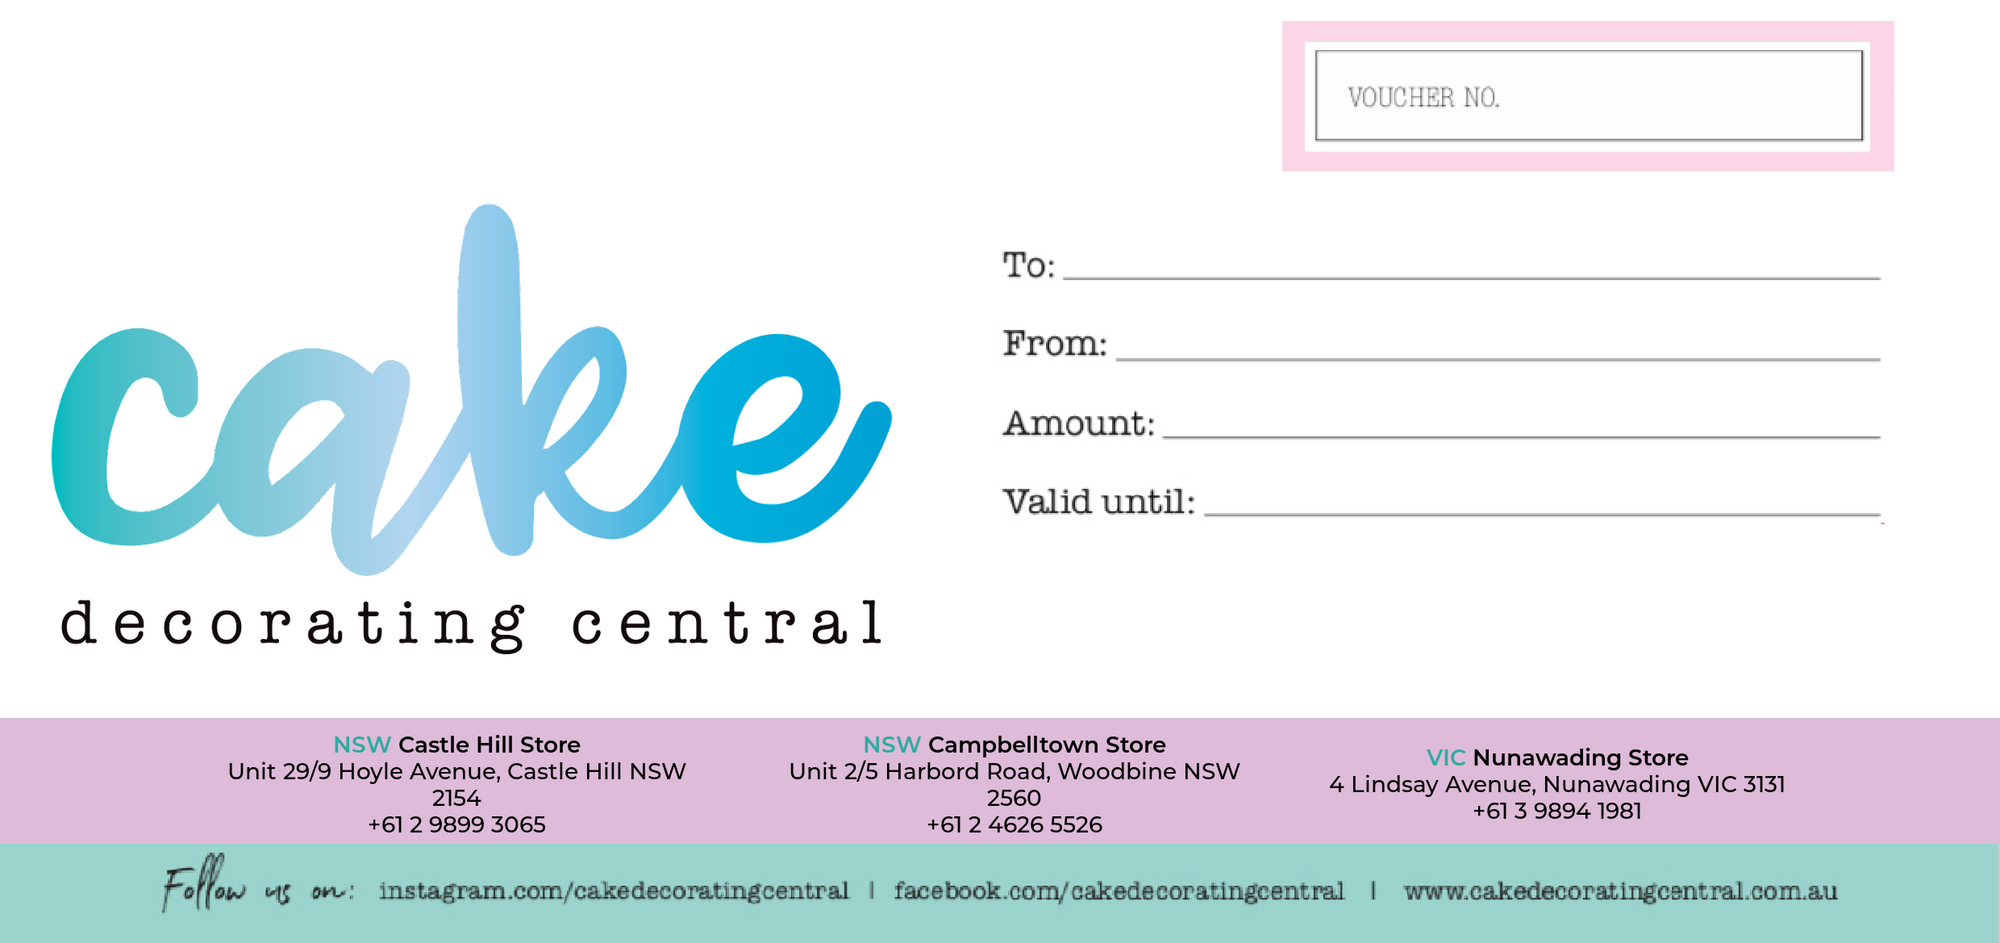 Gift card Voucher Bank Central Department Store Online shopping, gift  voucher, label, rectangle, bank png | PNGWing